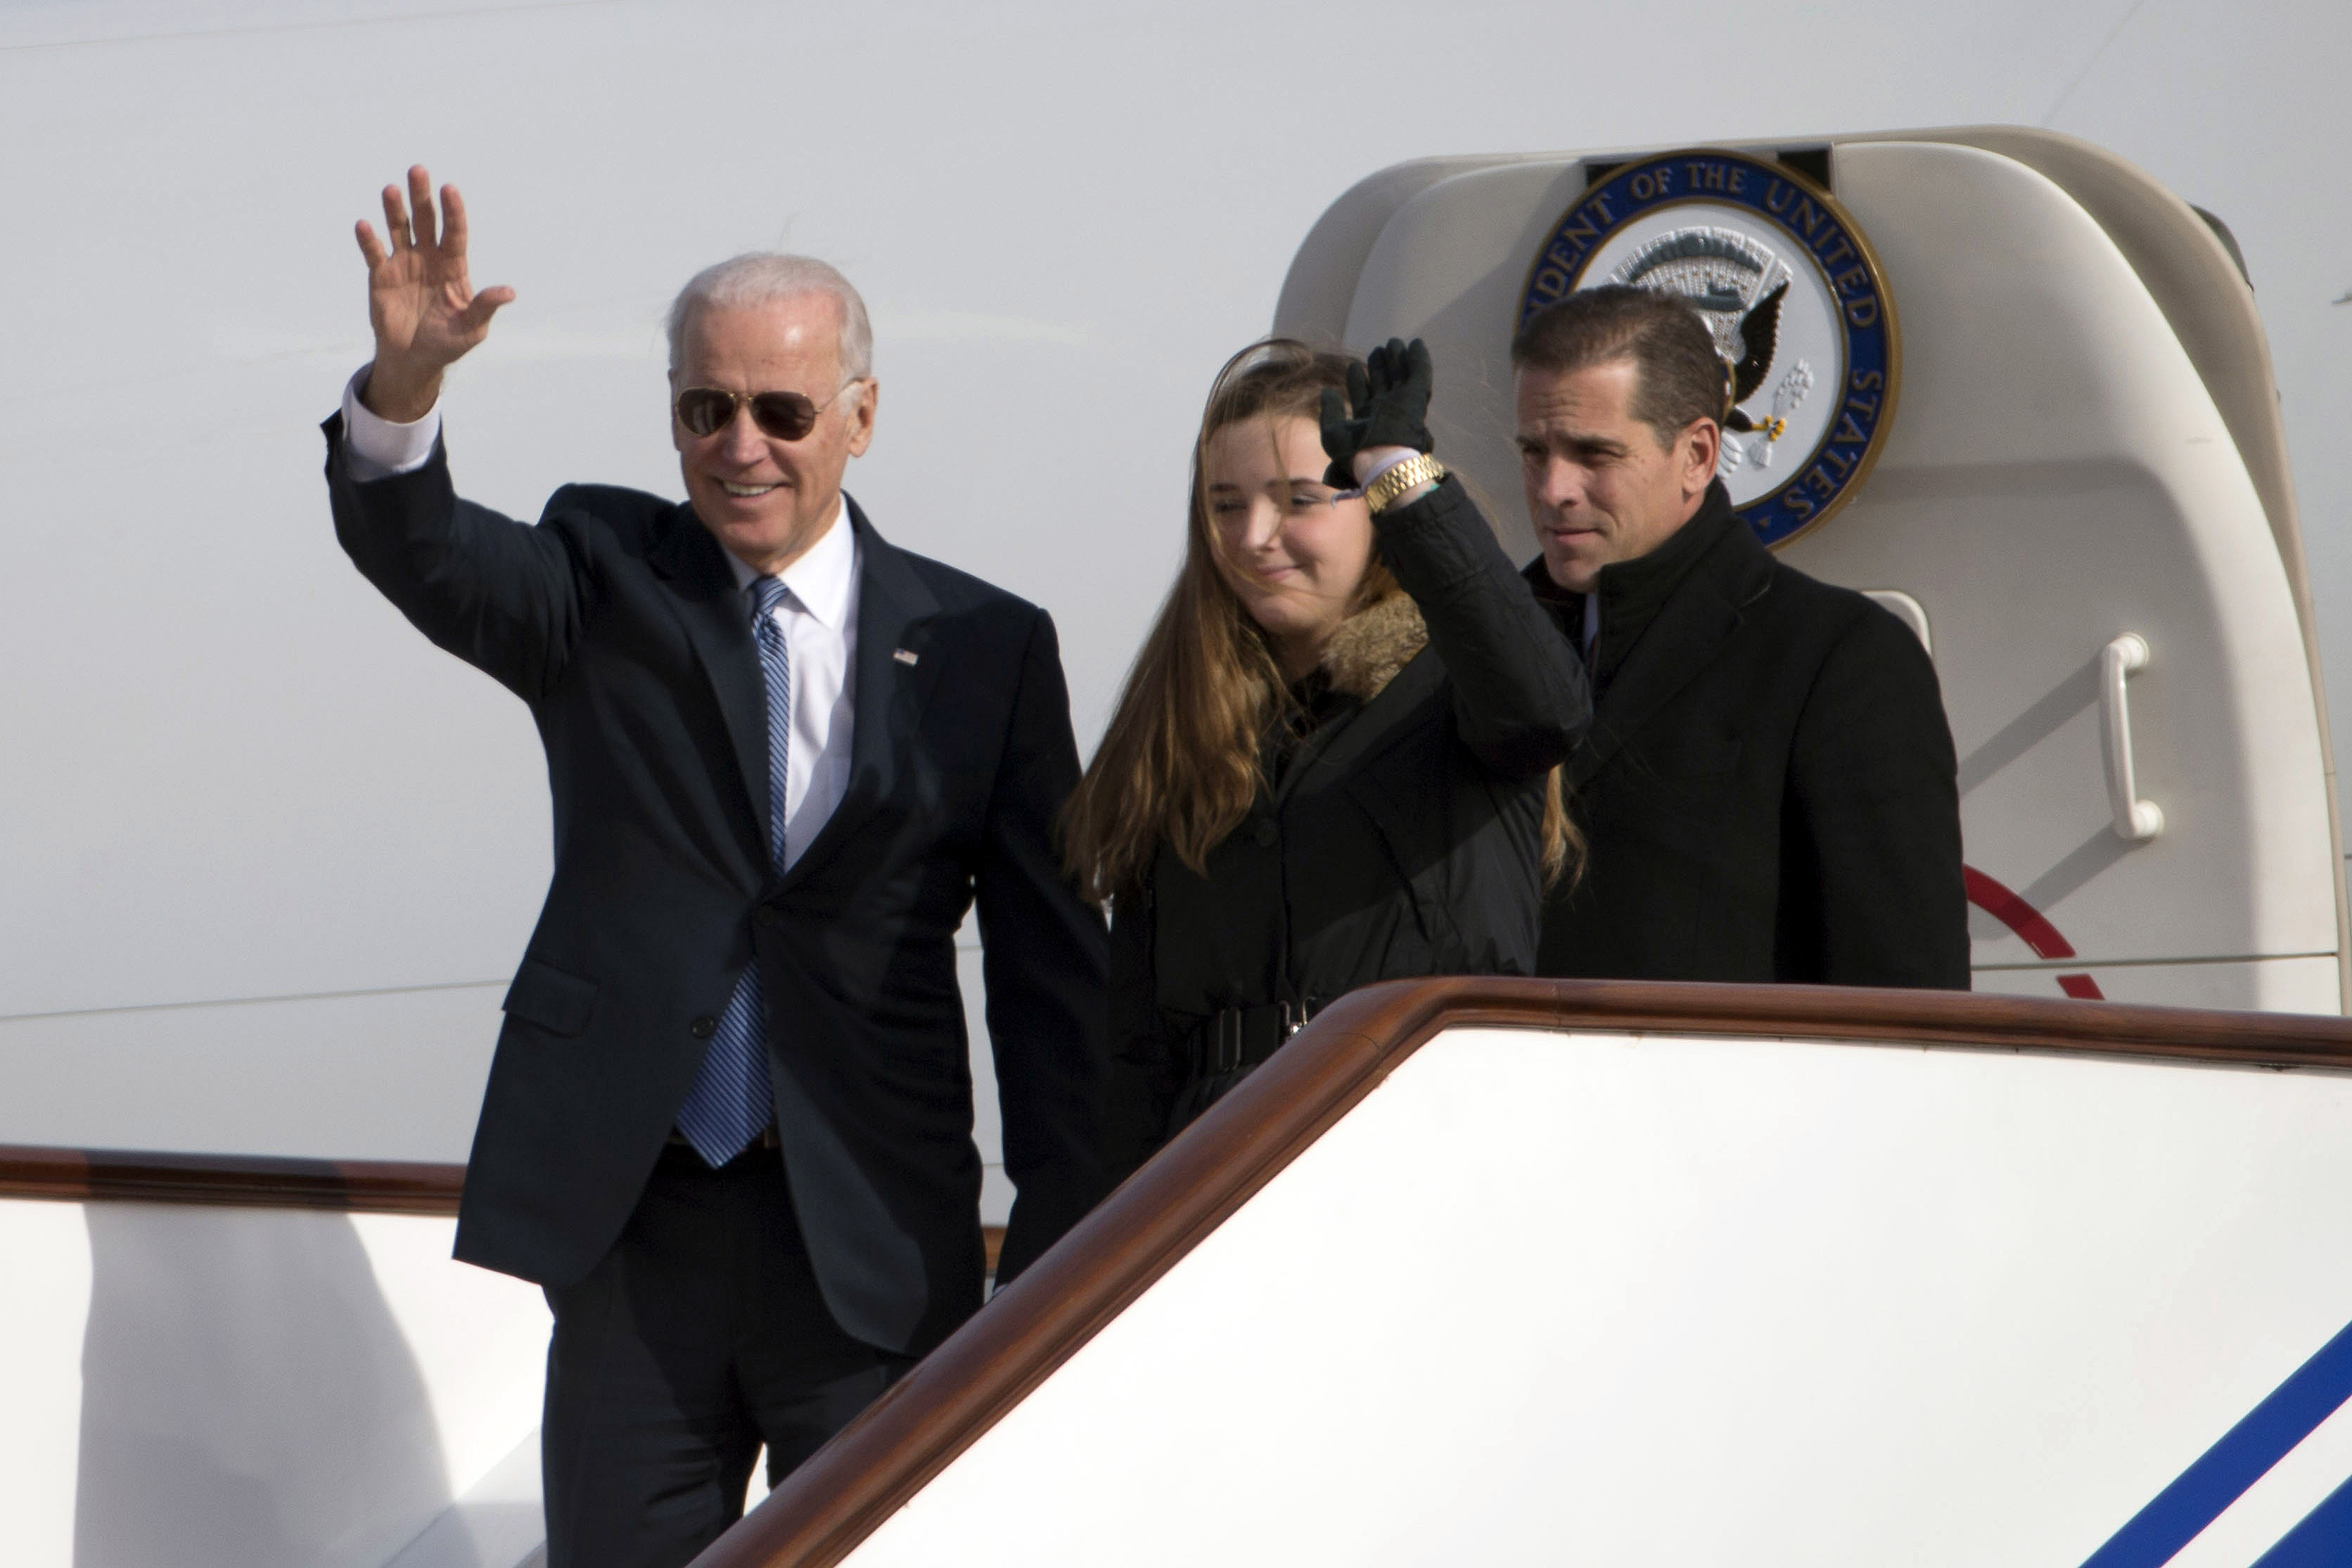 U.S. Vice President Joe Biden waves as he walks out of Air Force Two with his granddaughter Finnegan Biden and son Hunter Biden (R) on Dec. 4, 2013 in Beijing, China. (Photo by Ng Han Guan-Pool/Getty Images)